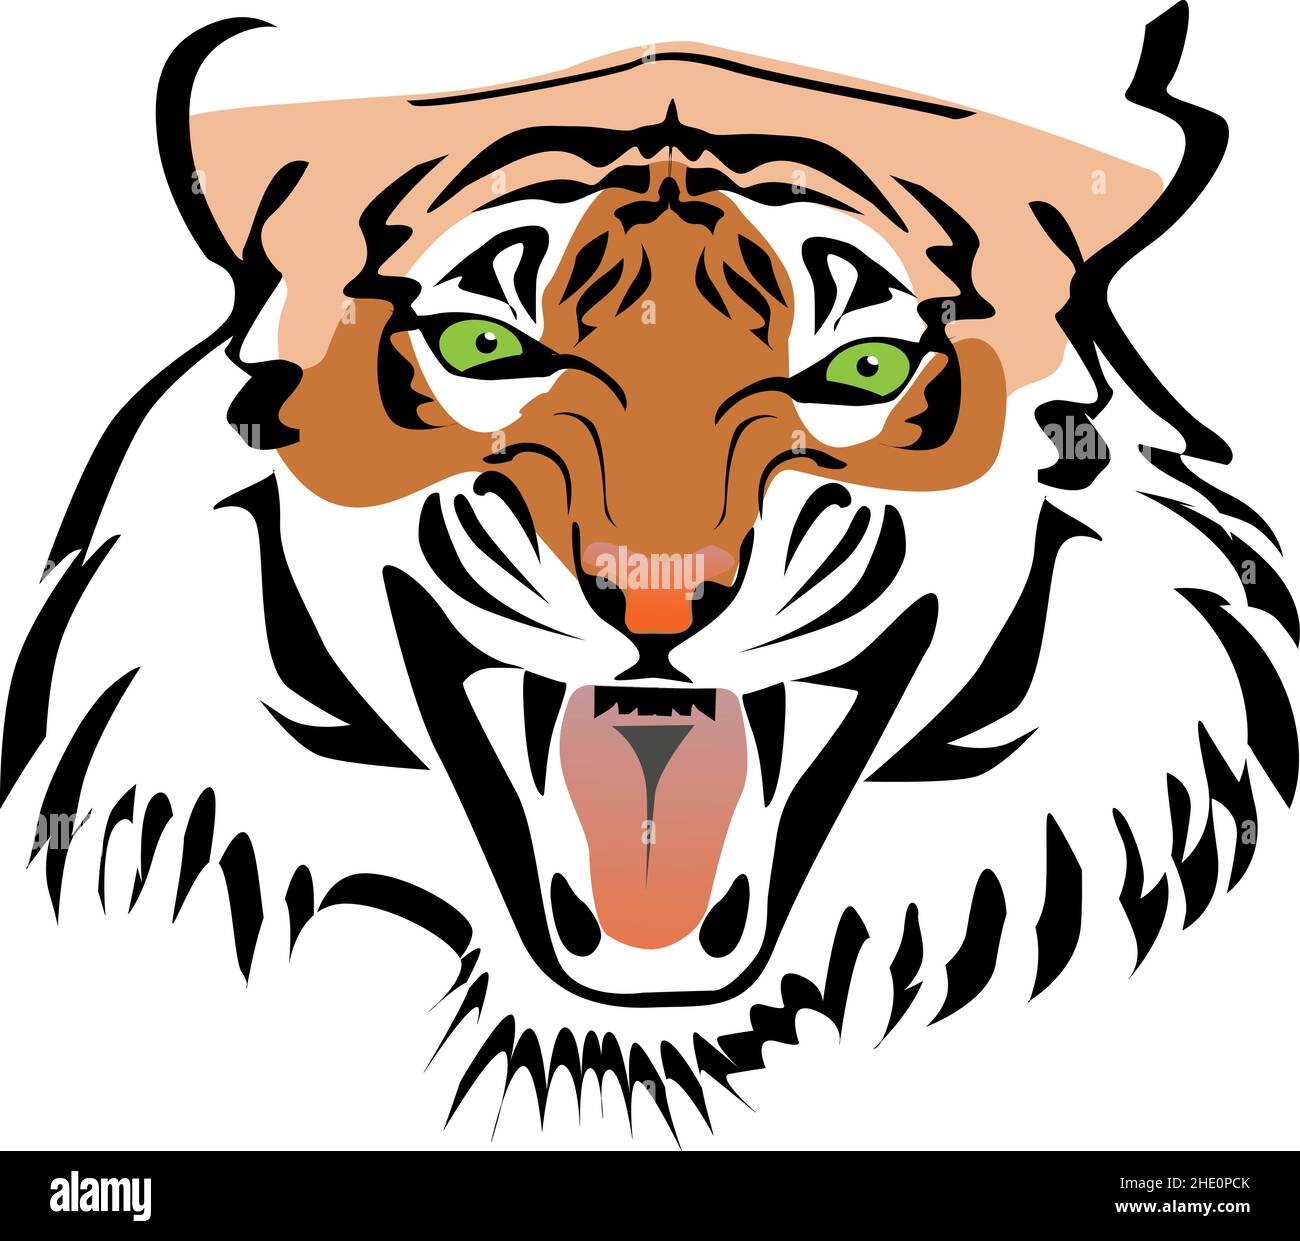 Front view of angry roaring toothy tiger face color vector illustration close up portrait Stock Vector